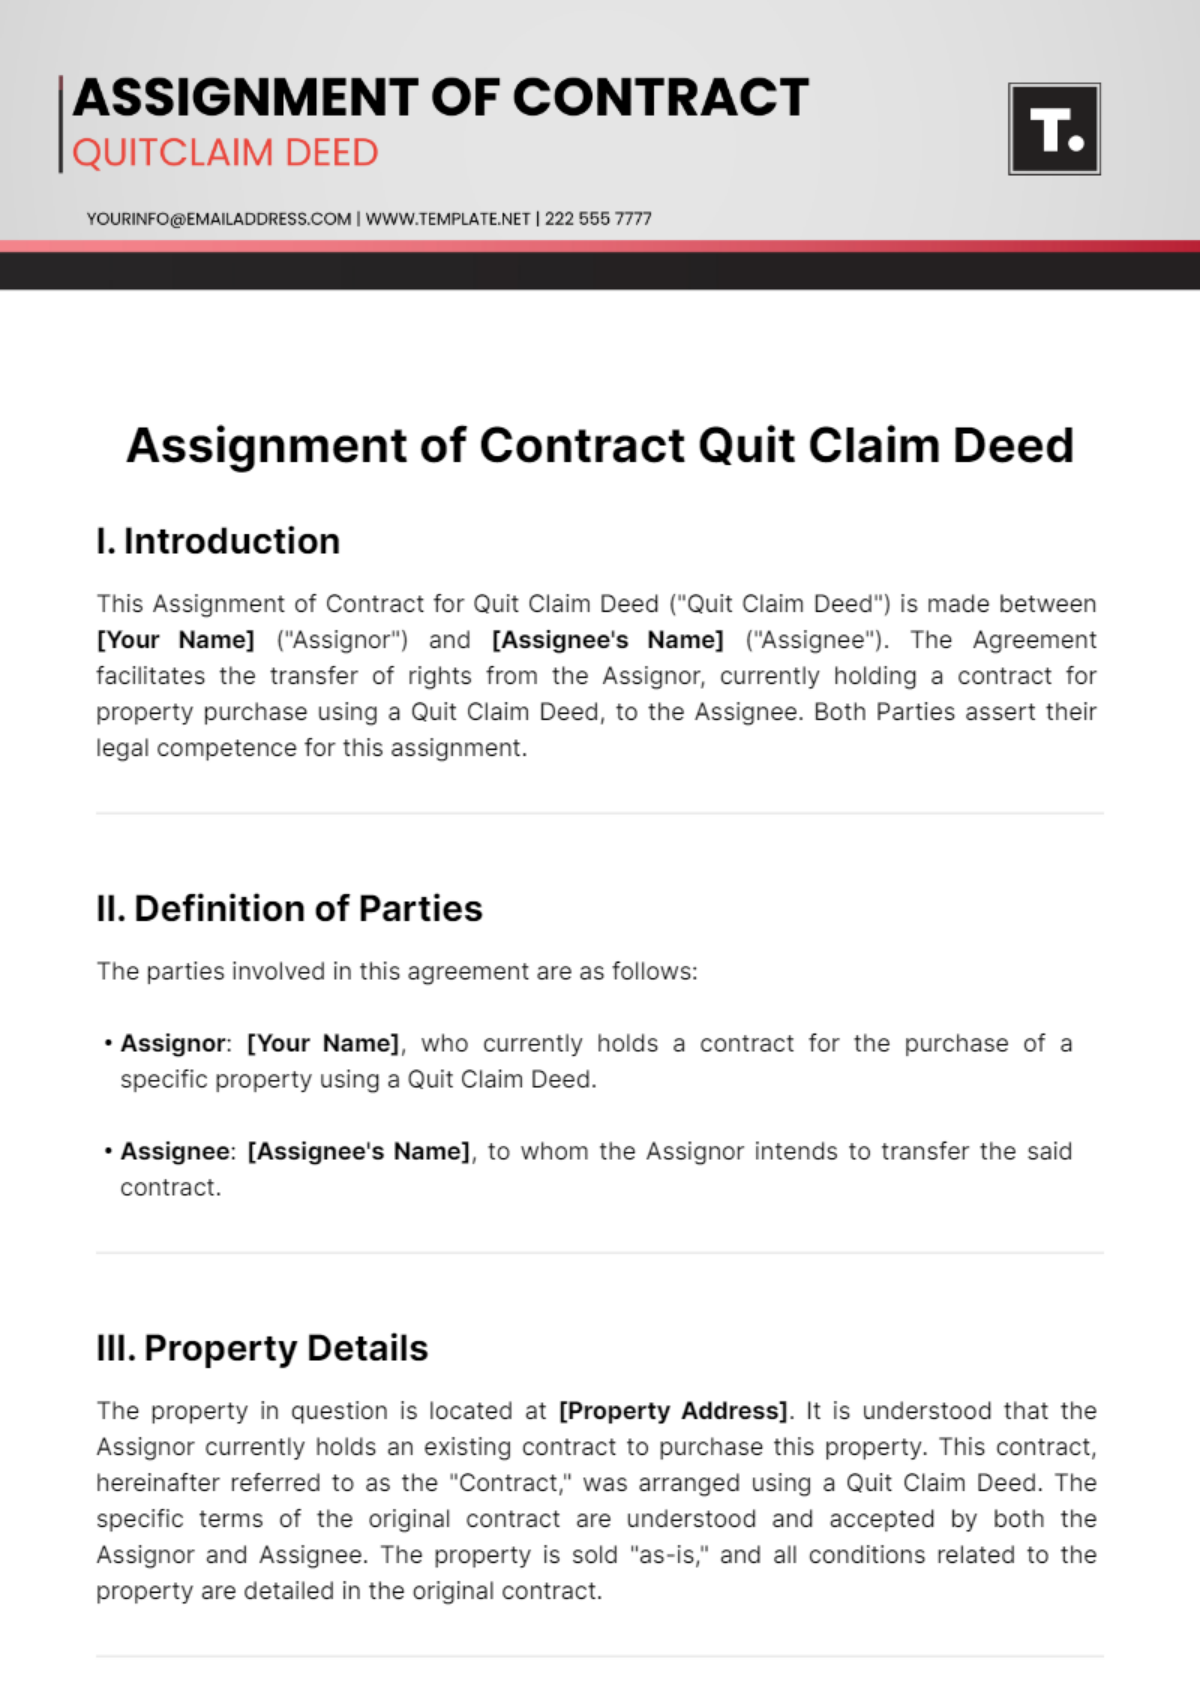 Free Assignment of Contract for Quit Claim Deed Template